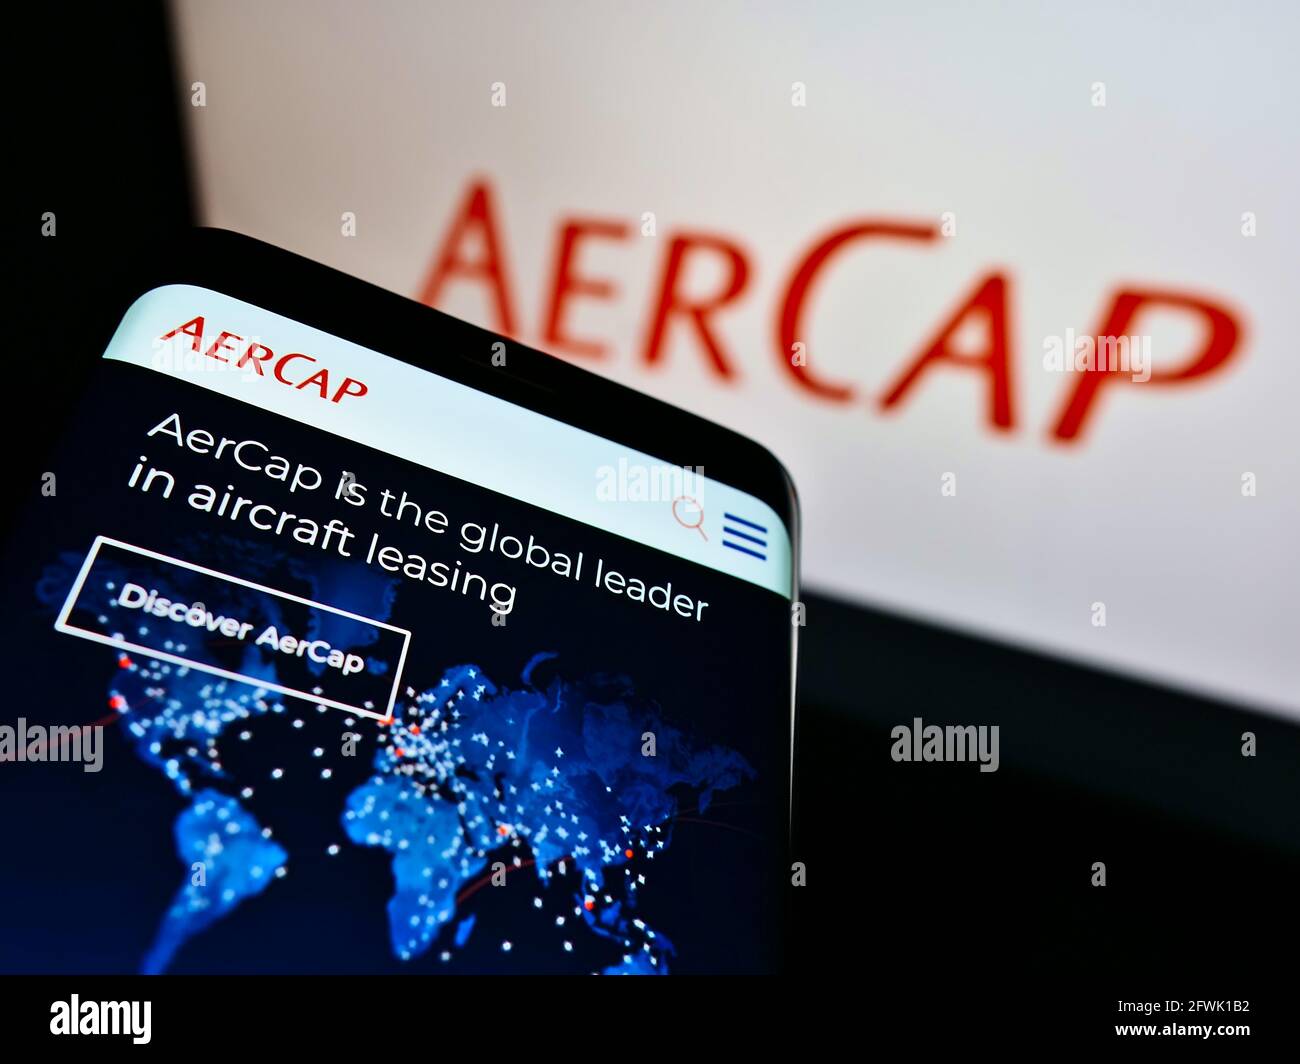 Smartphone with webpage of aircraft leasing company AerCap Holdings N.V. on screen in front of business logo. Focus on top-left of phone display. Stock Photo